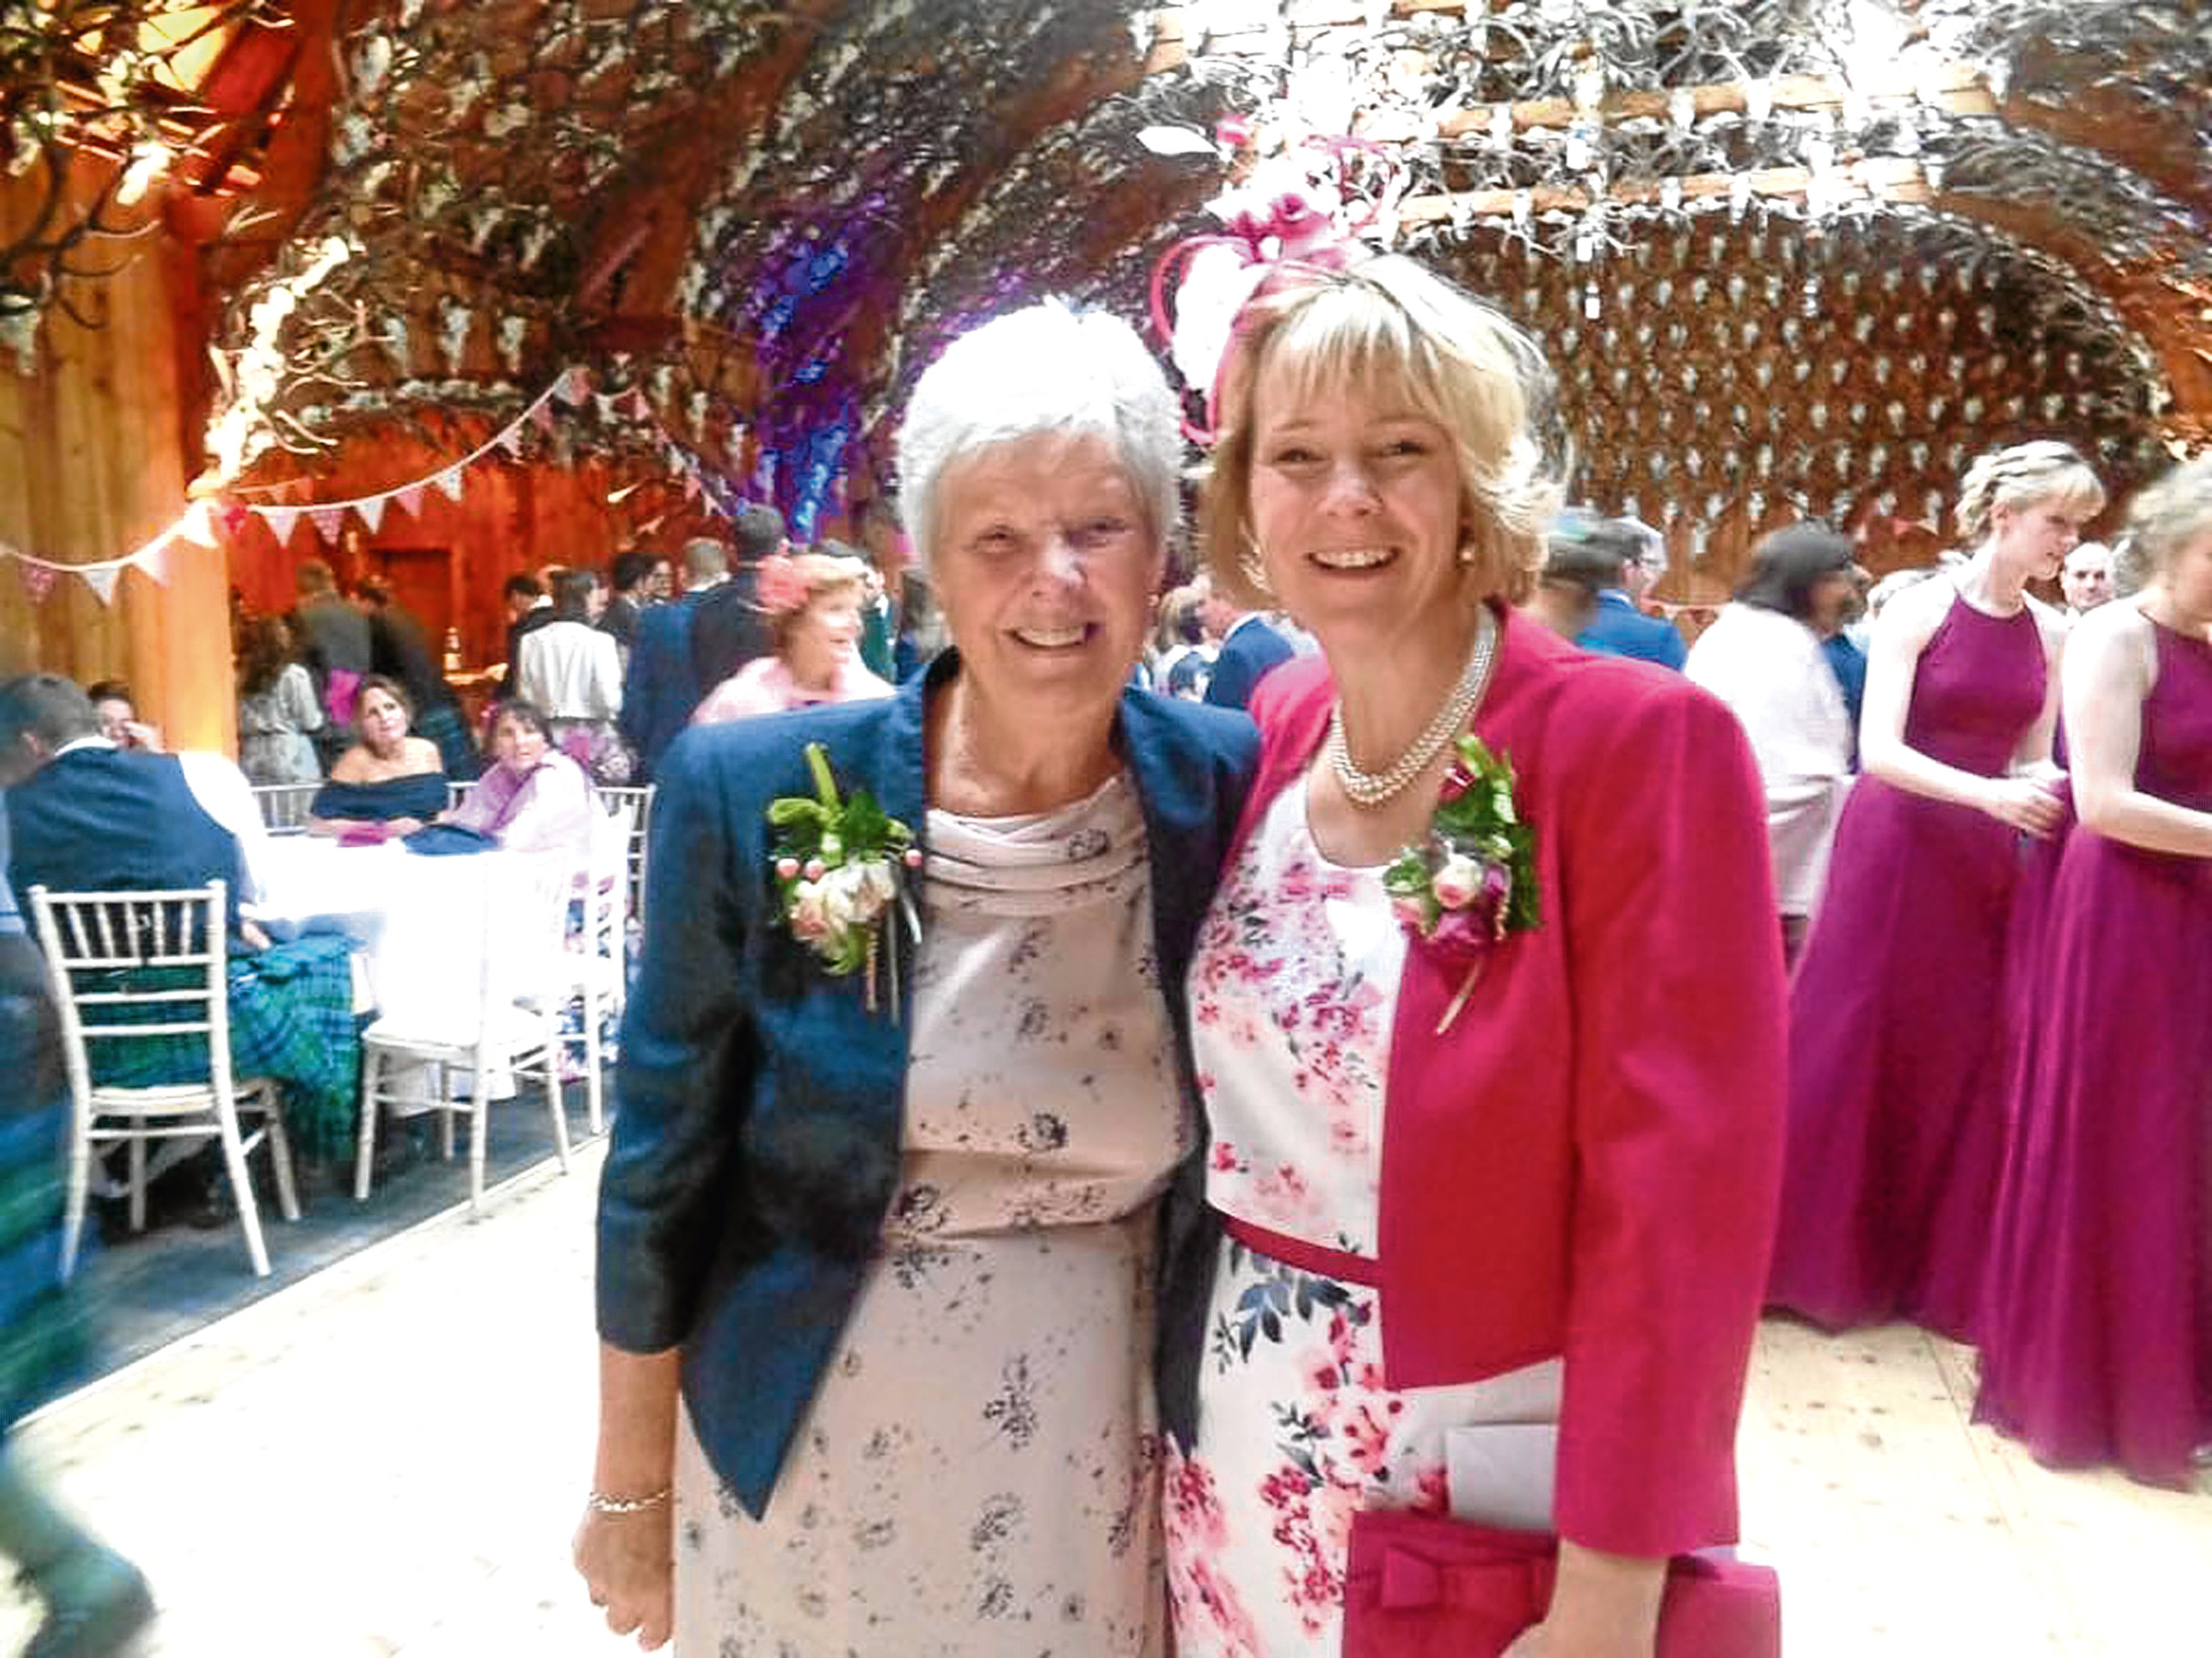 Pat with Joanne at the wedding. John Lewis will know better than to cross swords with Pat again